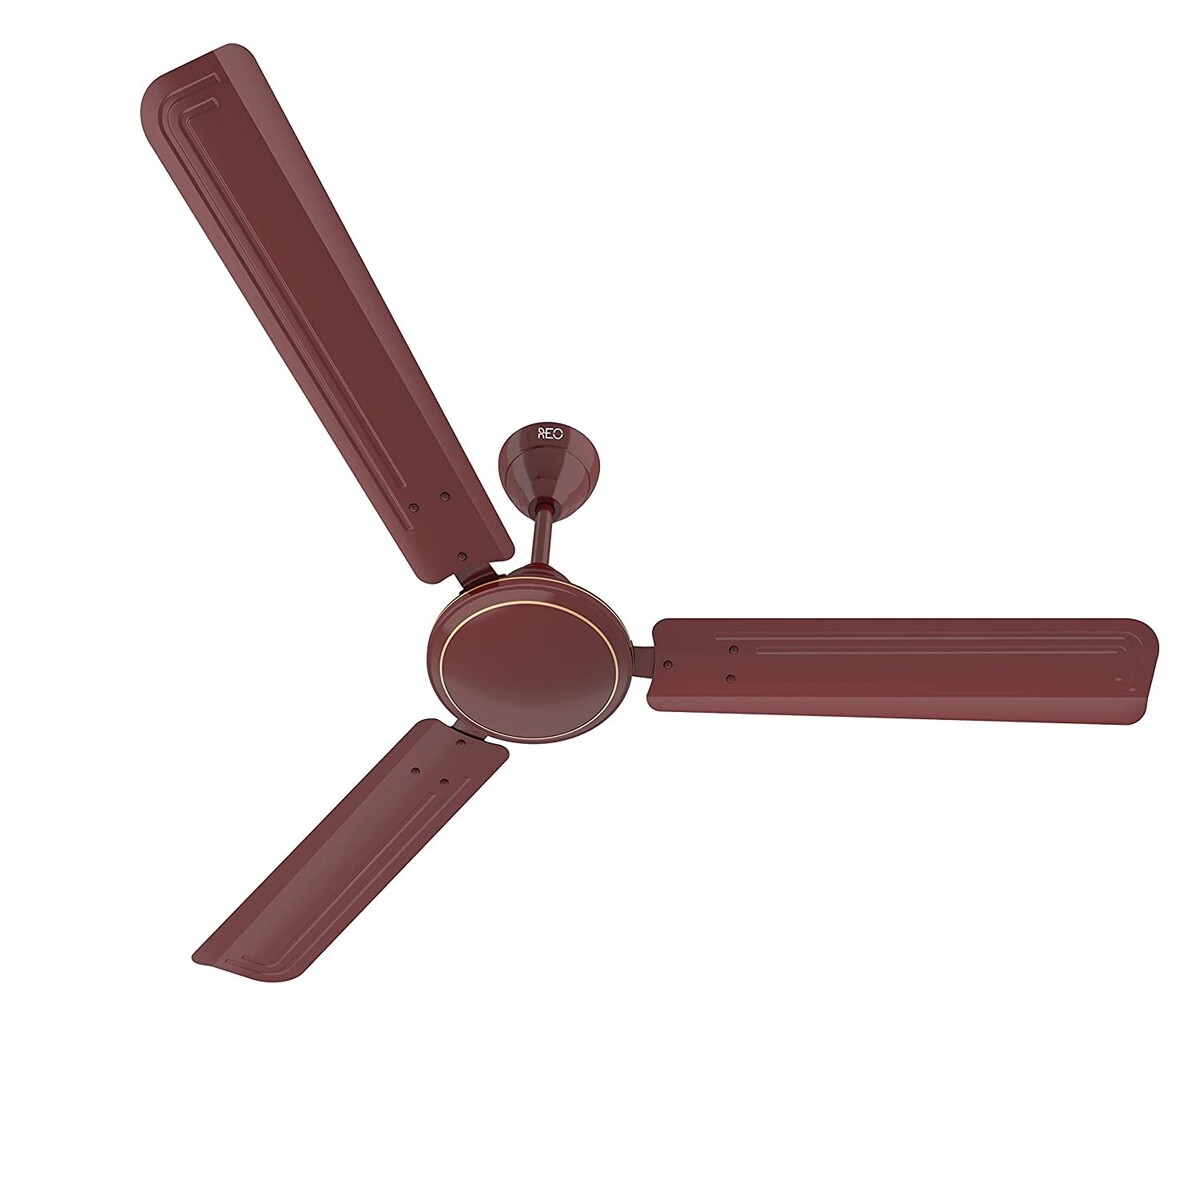 Havells Reo Tejas High Speed Ceiling Fan 1200mm